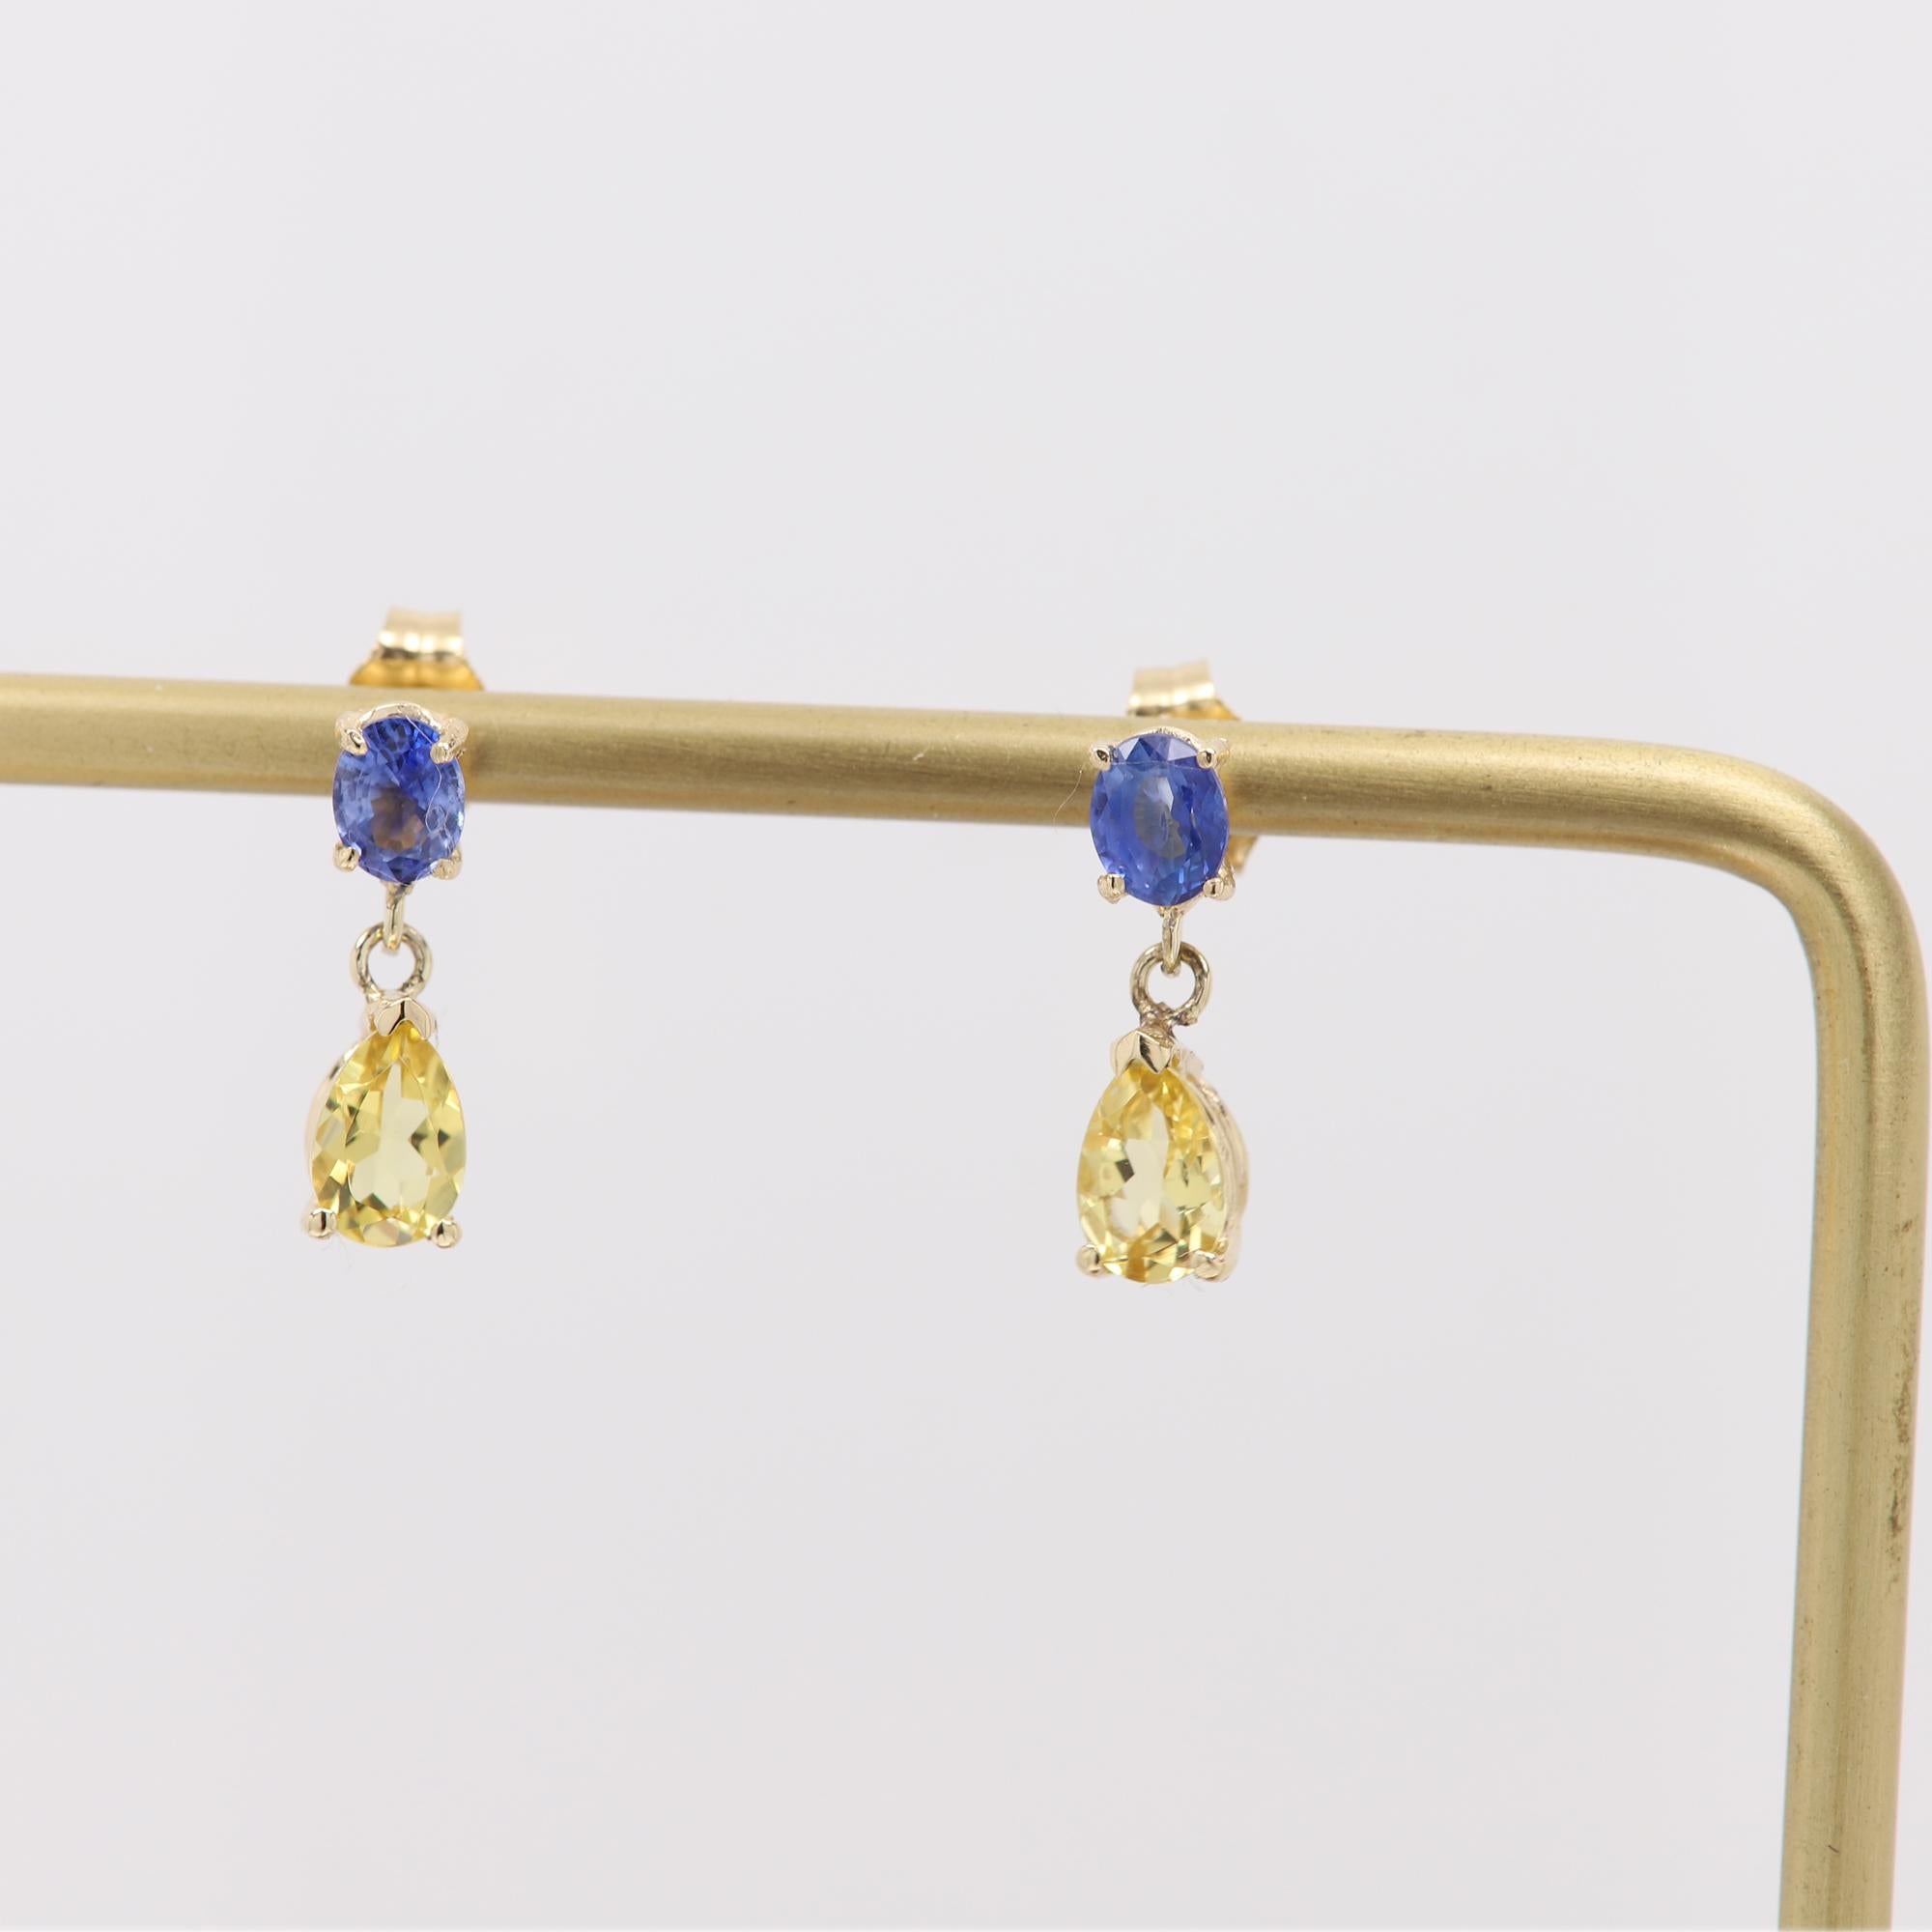 Cute Small Dangle Earrings 14 Karat Yellow Gold Blue Sapphire and Citrine For Sale 1